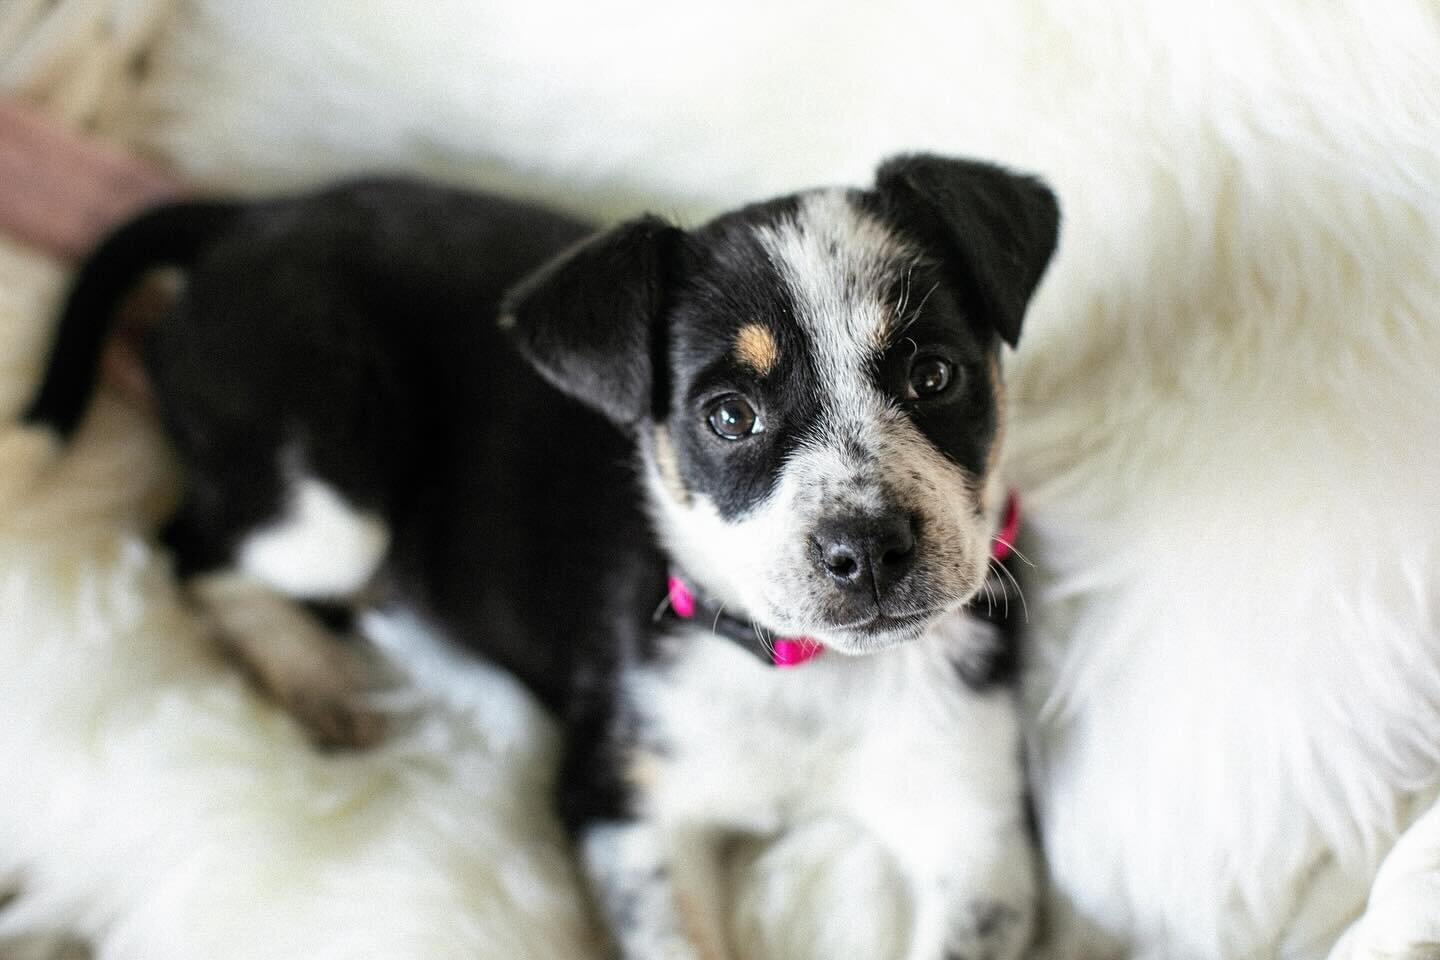 Boop the snoot! Meet the newest member of our family 🐾 Kali